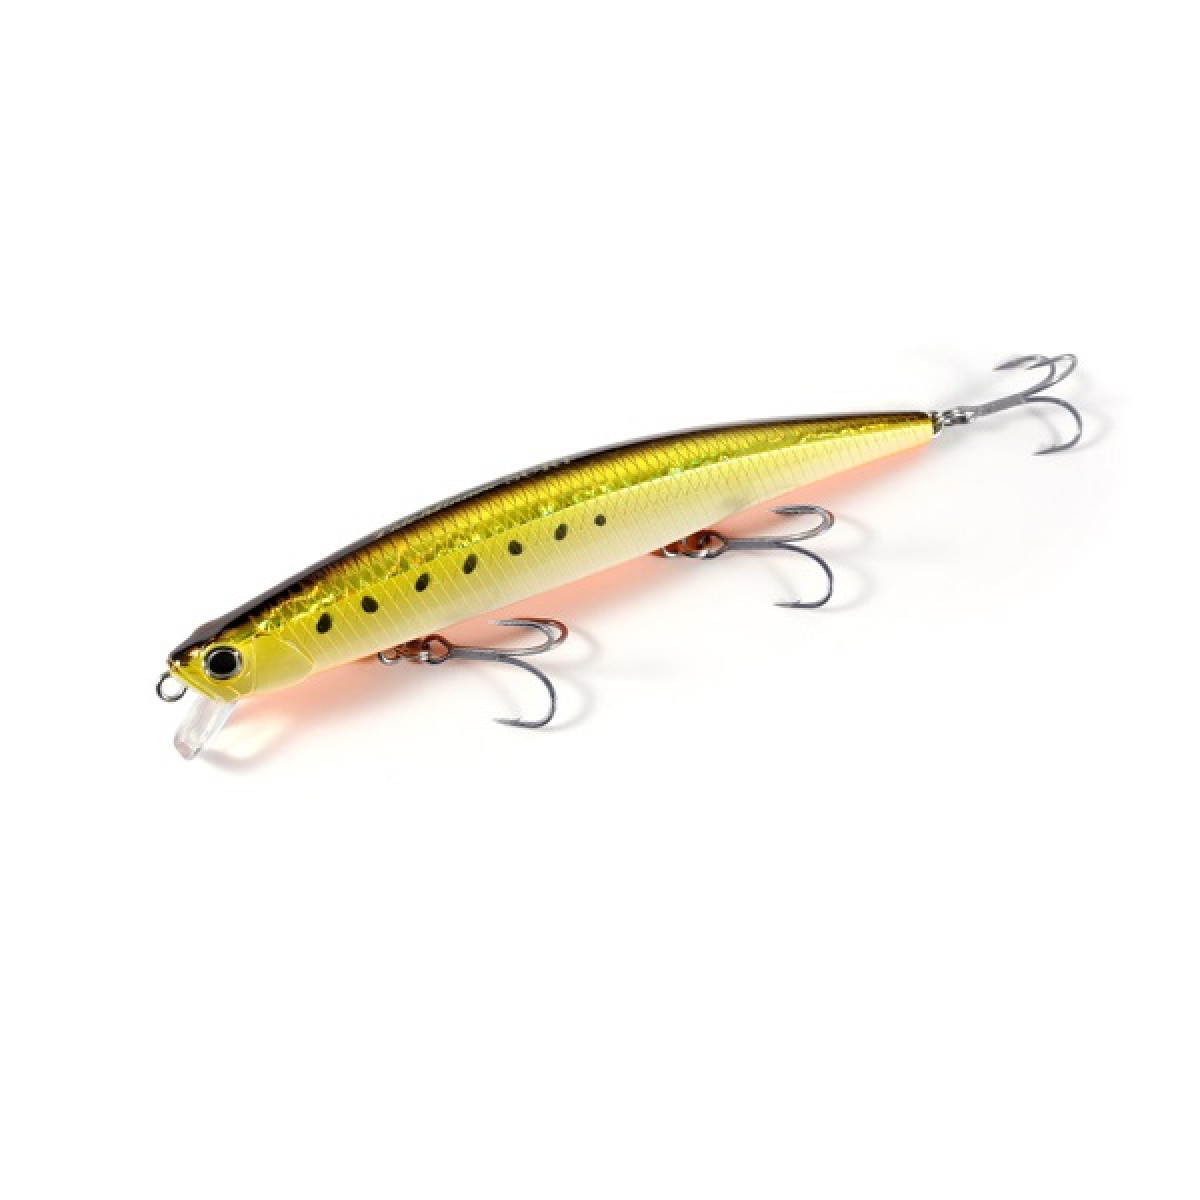 DUO TIDE MINNOW 150 SURF